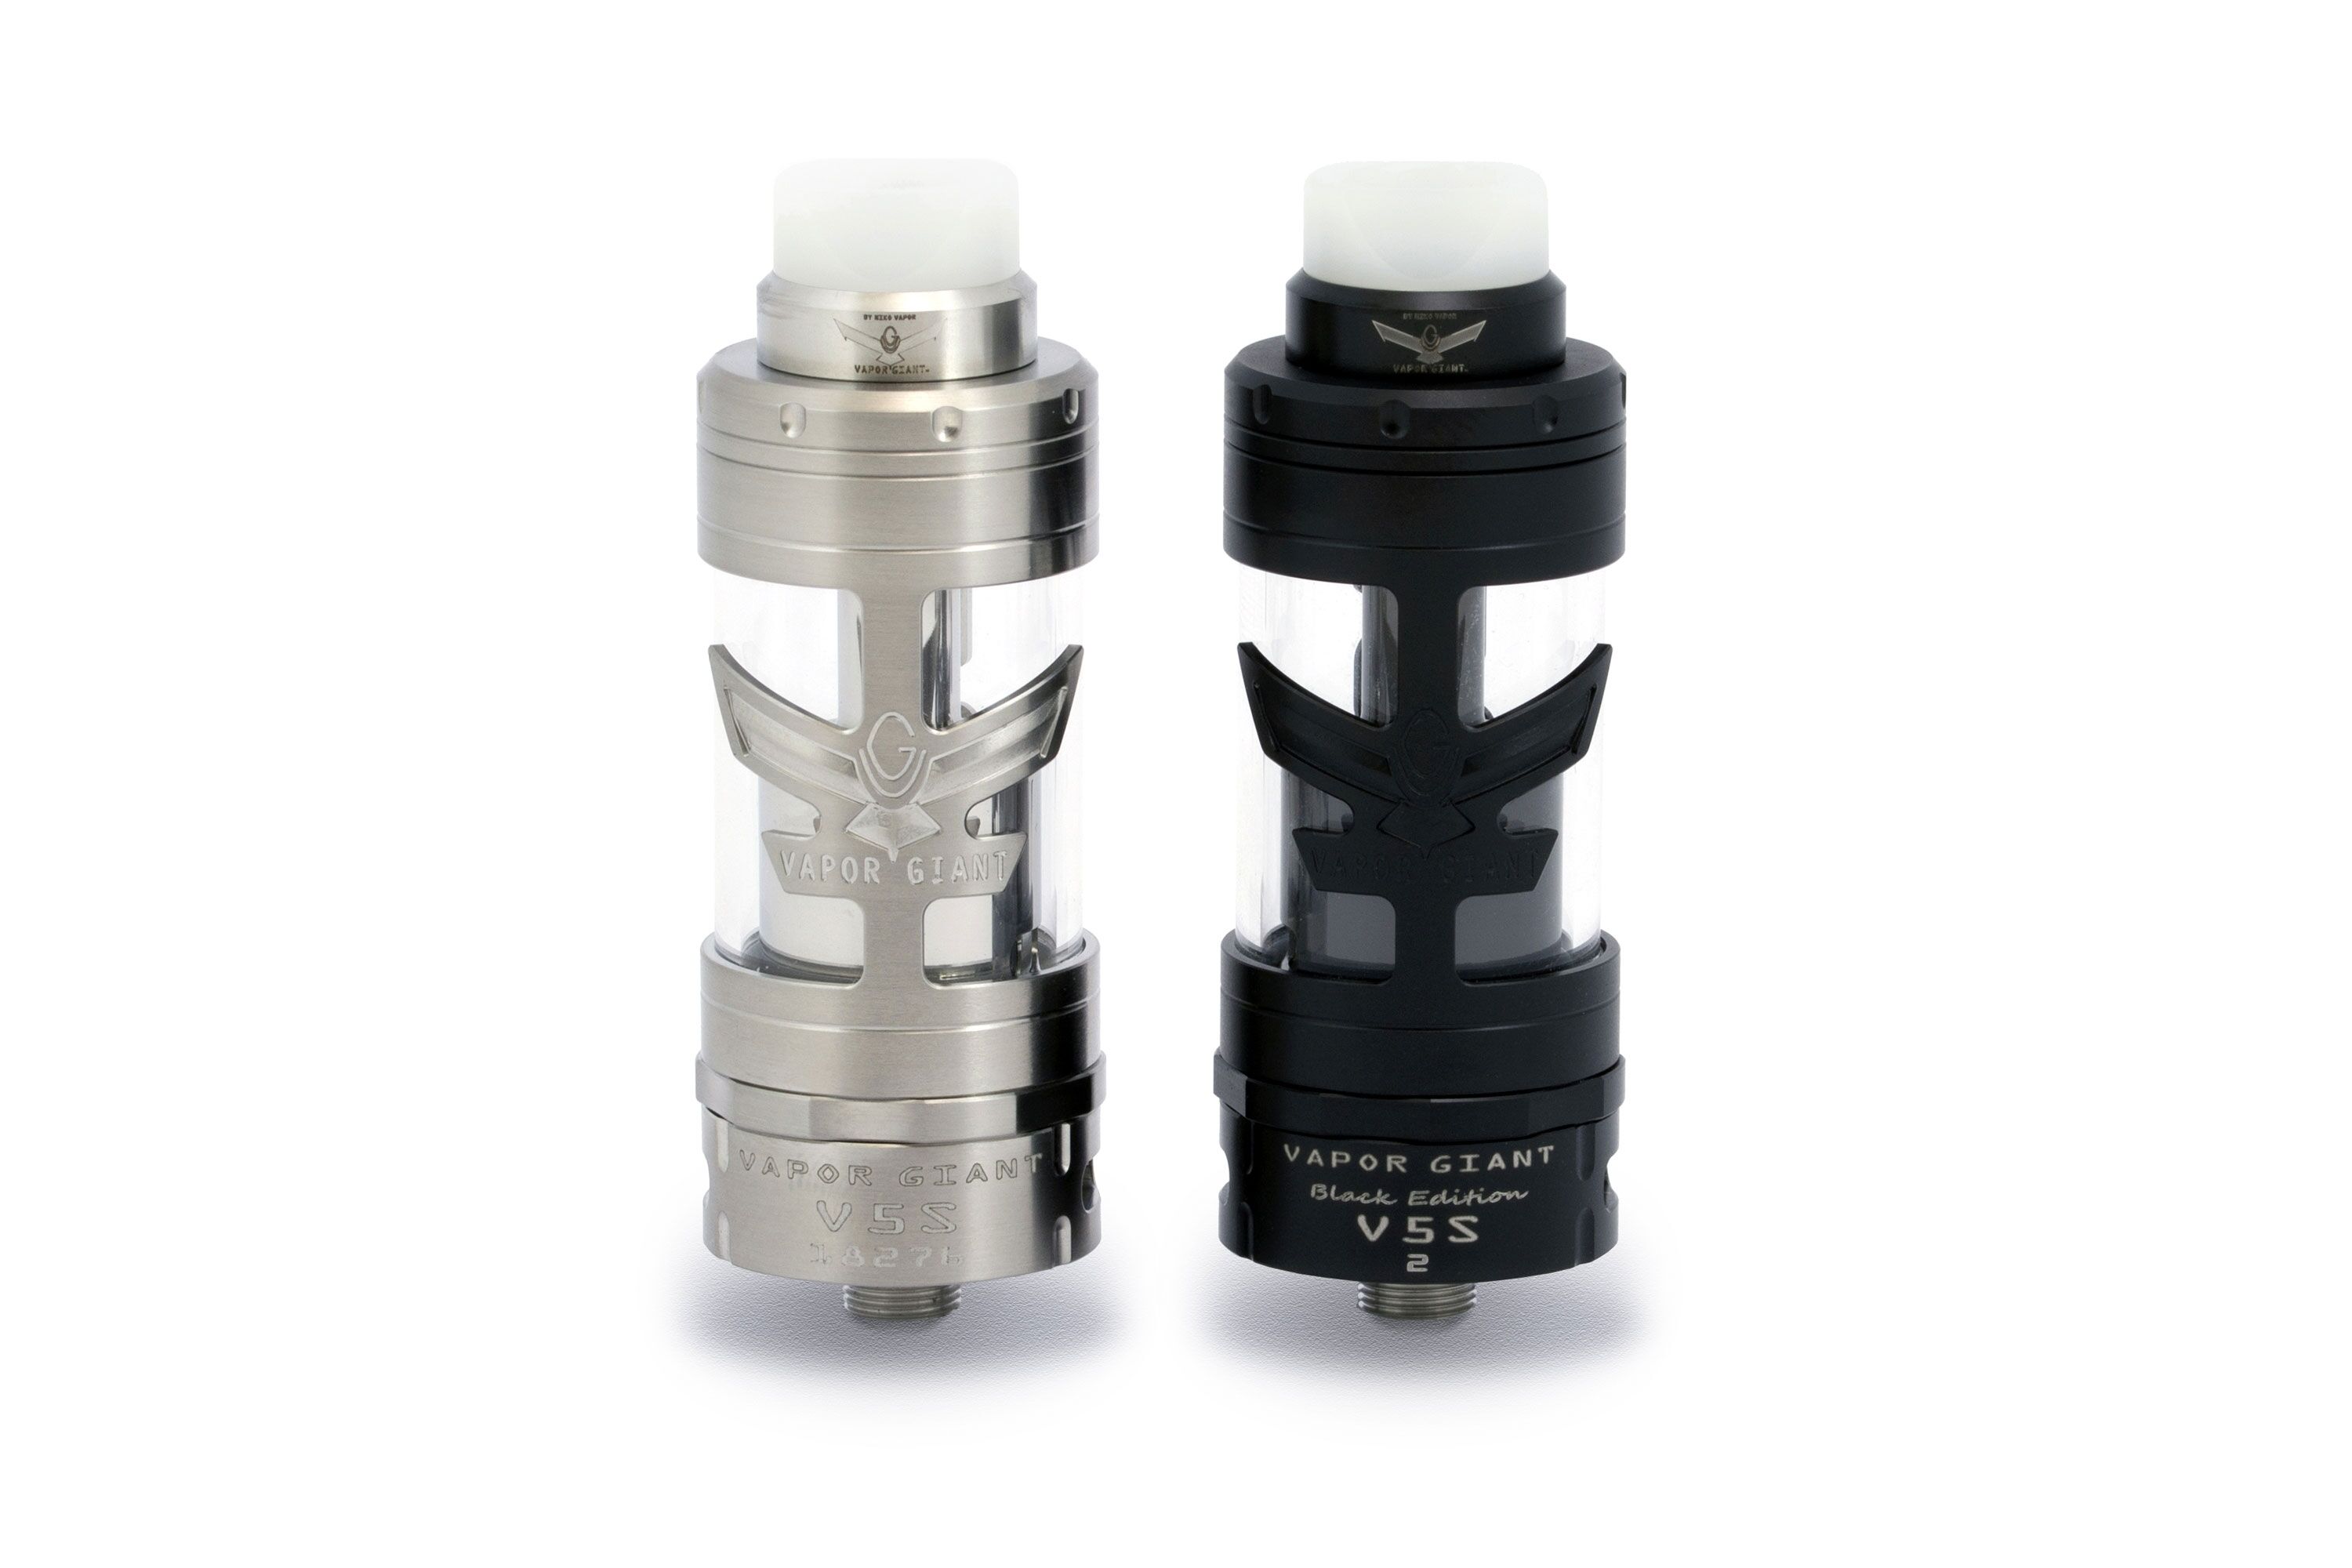 VAPOR GIANT V5S Atomizzatore Stainless Steel